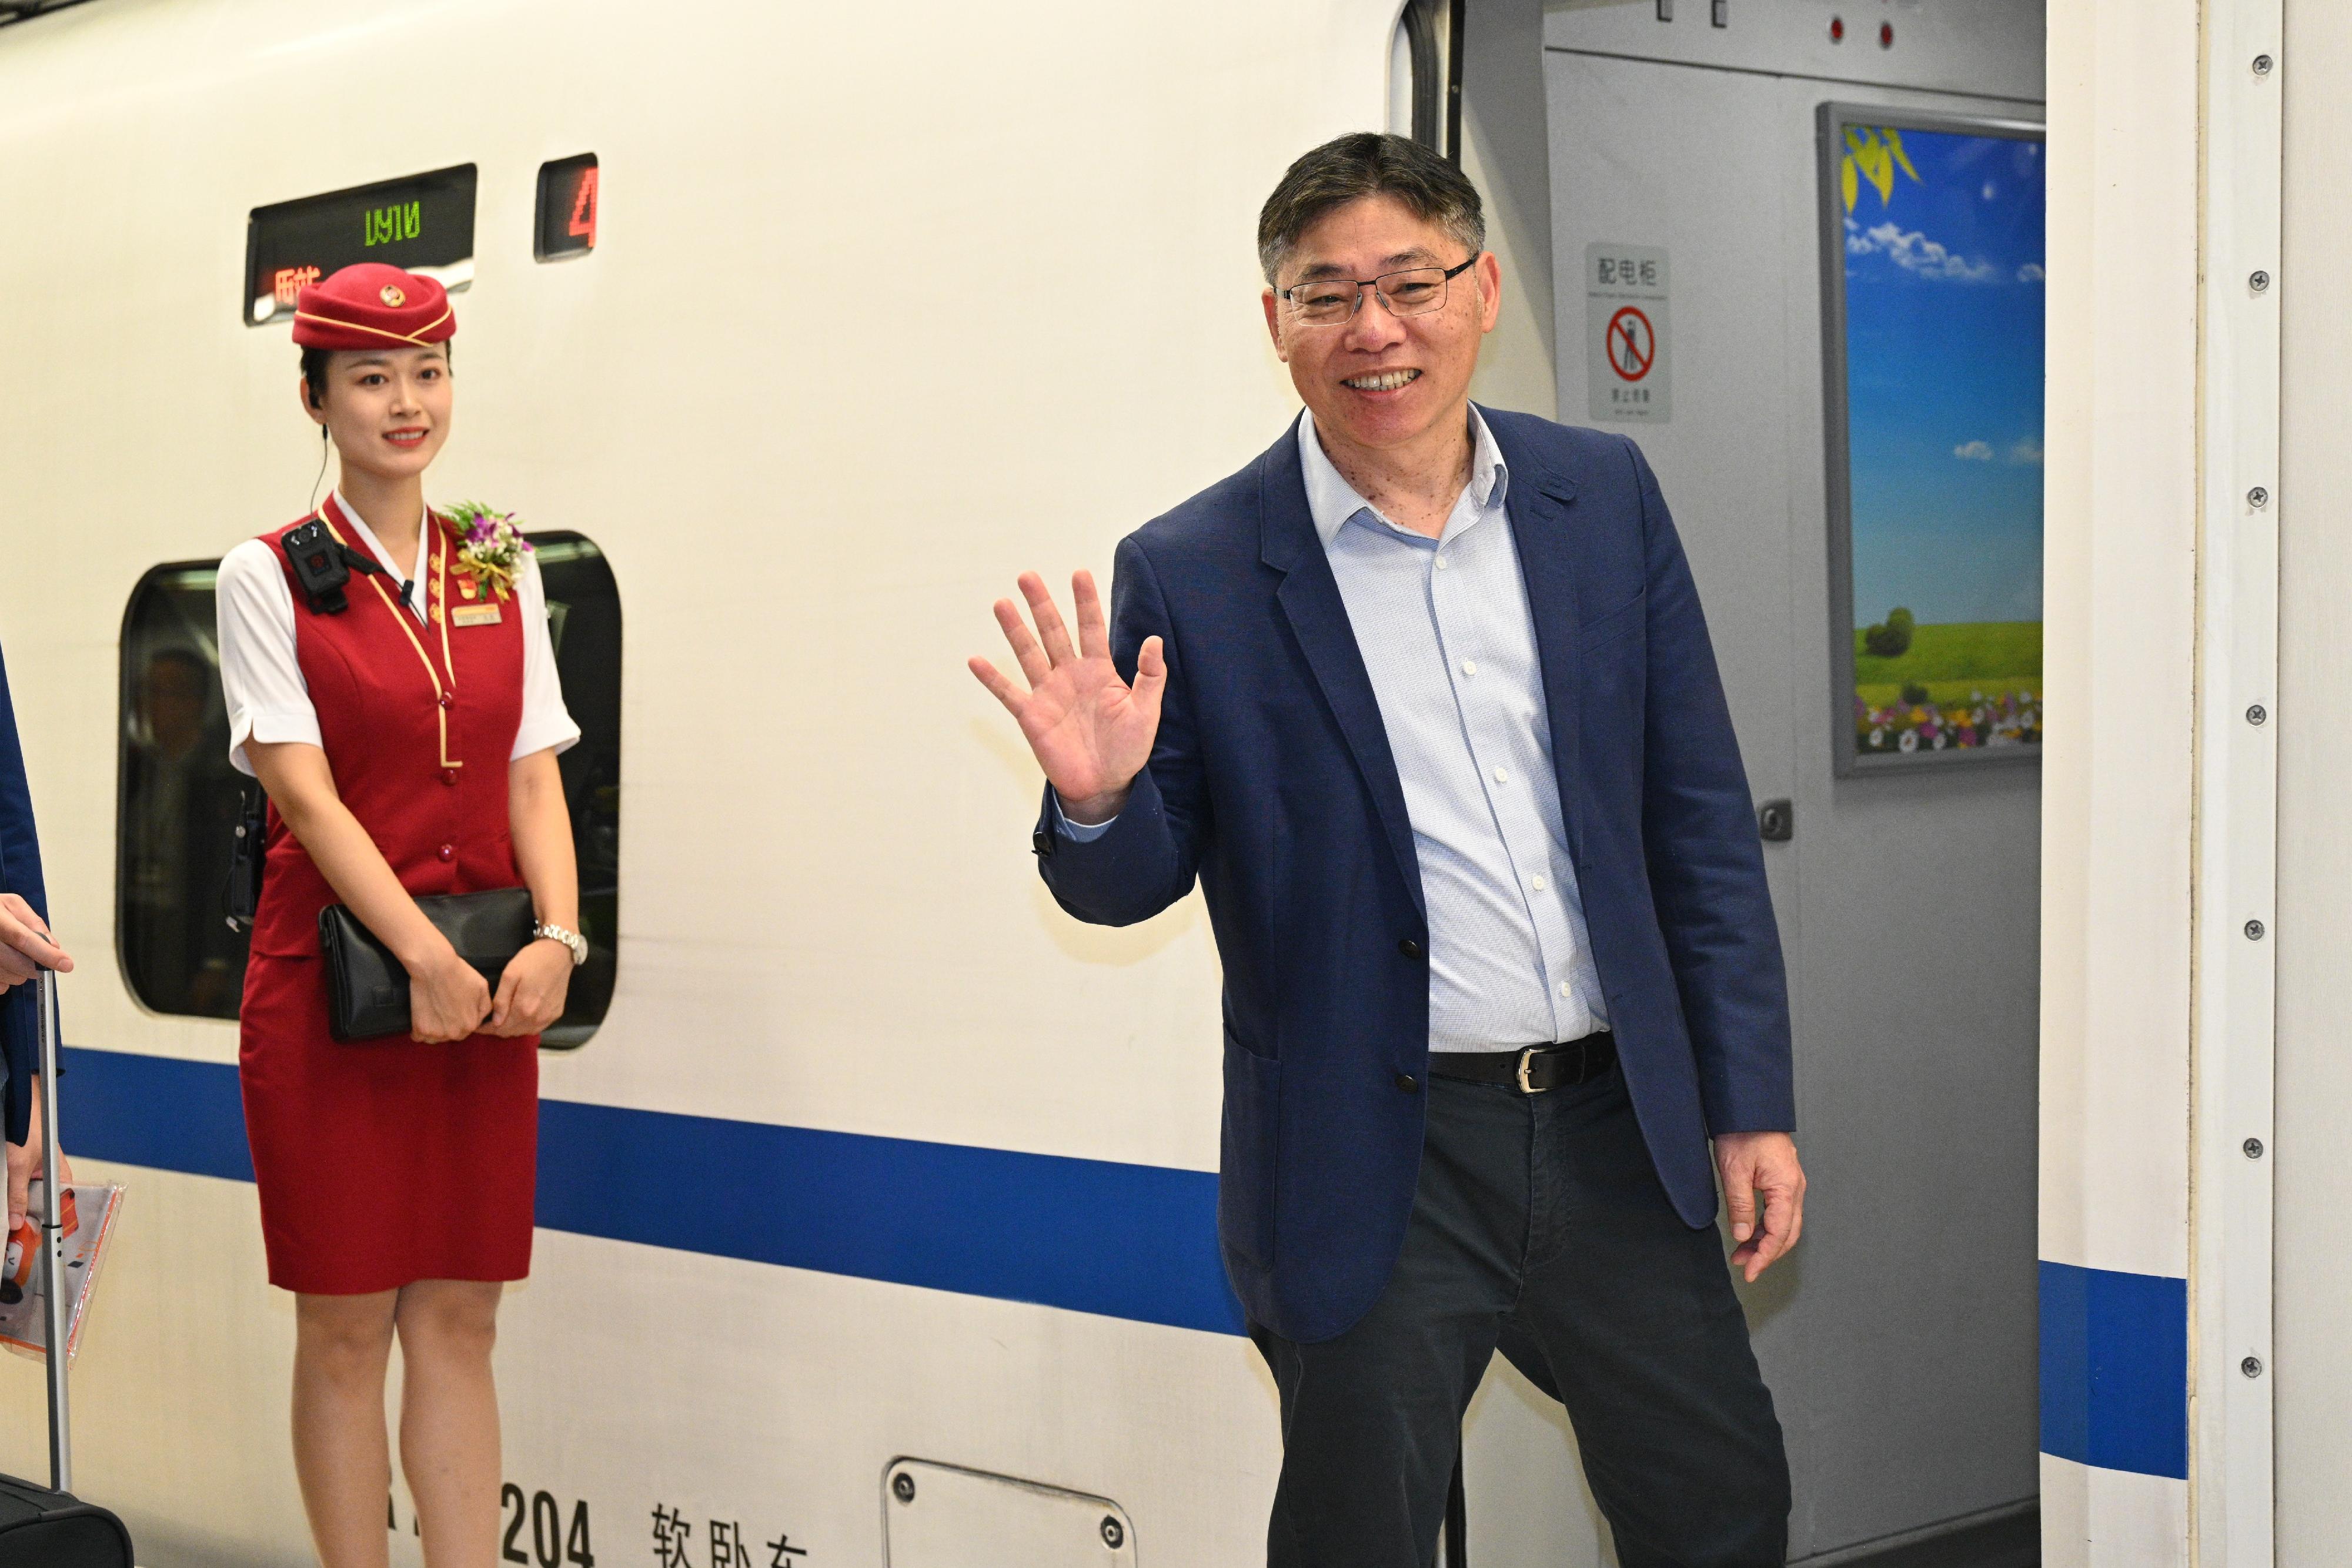 The Secretary for Transport and Logistics, Mr Lam Sai-hung (right), takes the inaugural sleeper train of the Guangzhou-Shenzhen-Hong Kong Express Rail Link from the Hong Kong West Kowloon Station to the Beijingxi Station at dusk today (June 15).
